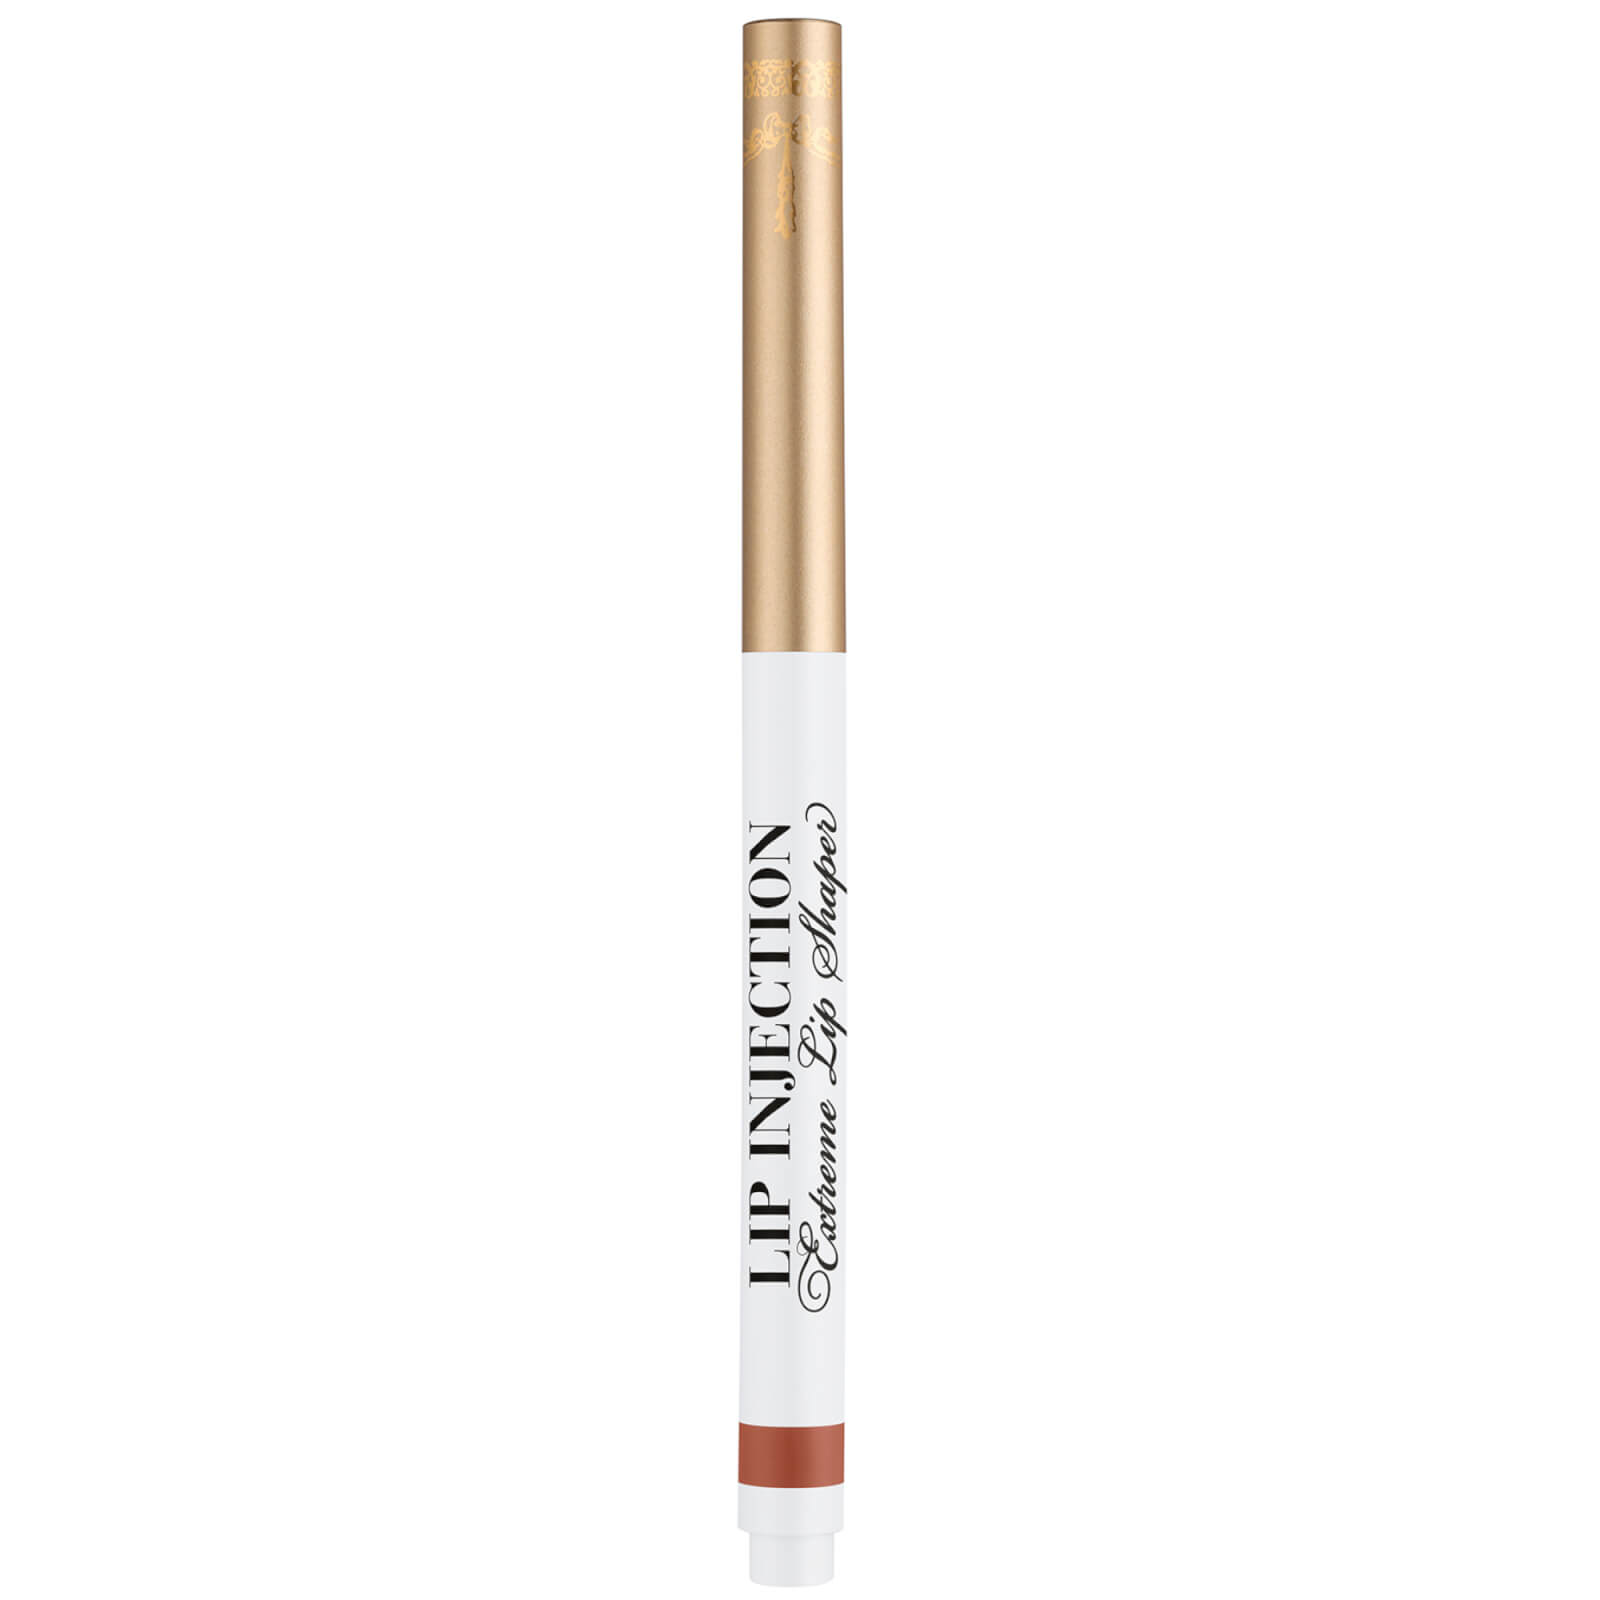 Too Faced Lip Injection Extreme Lip Shaper 0.23g (Various Shades) - Cinnamon Swell